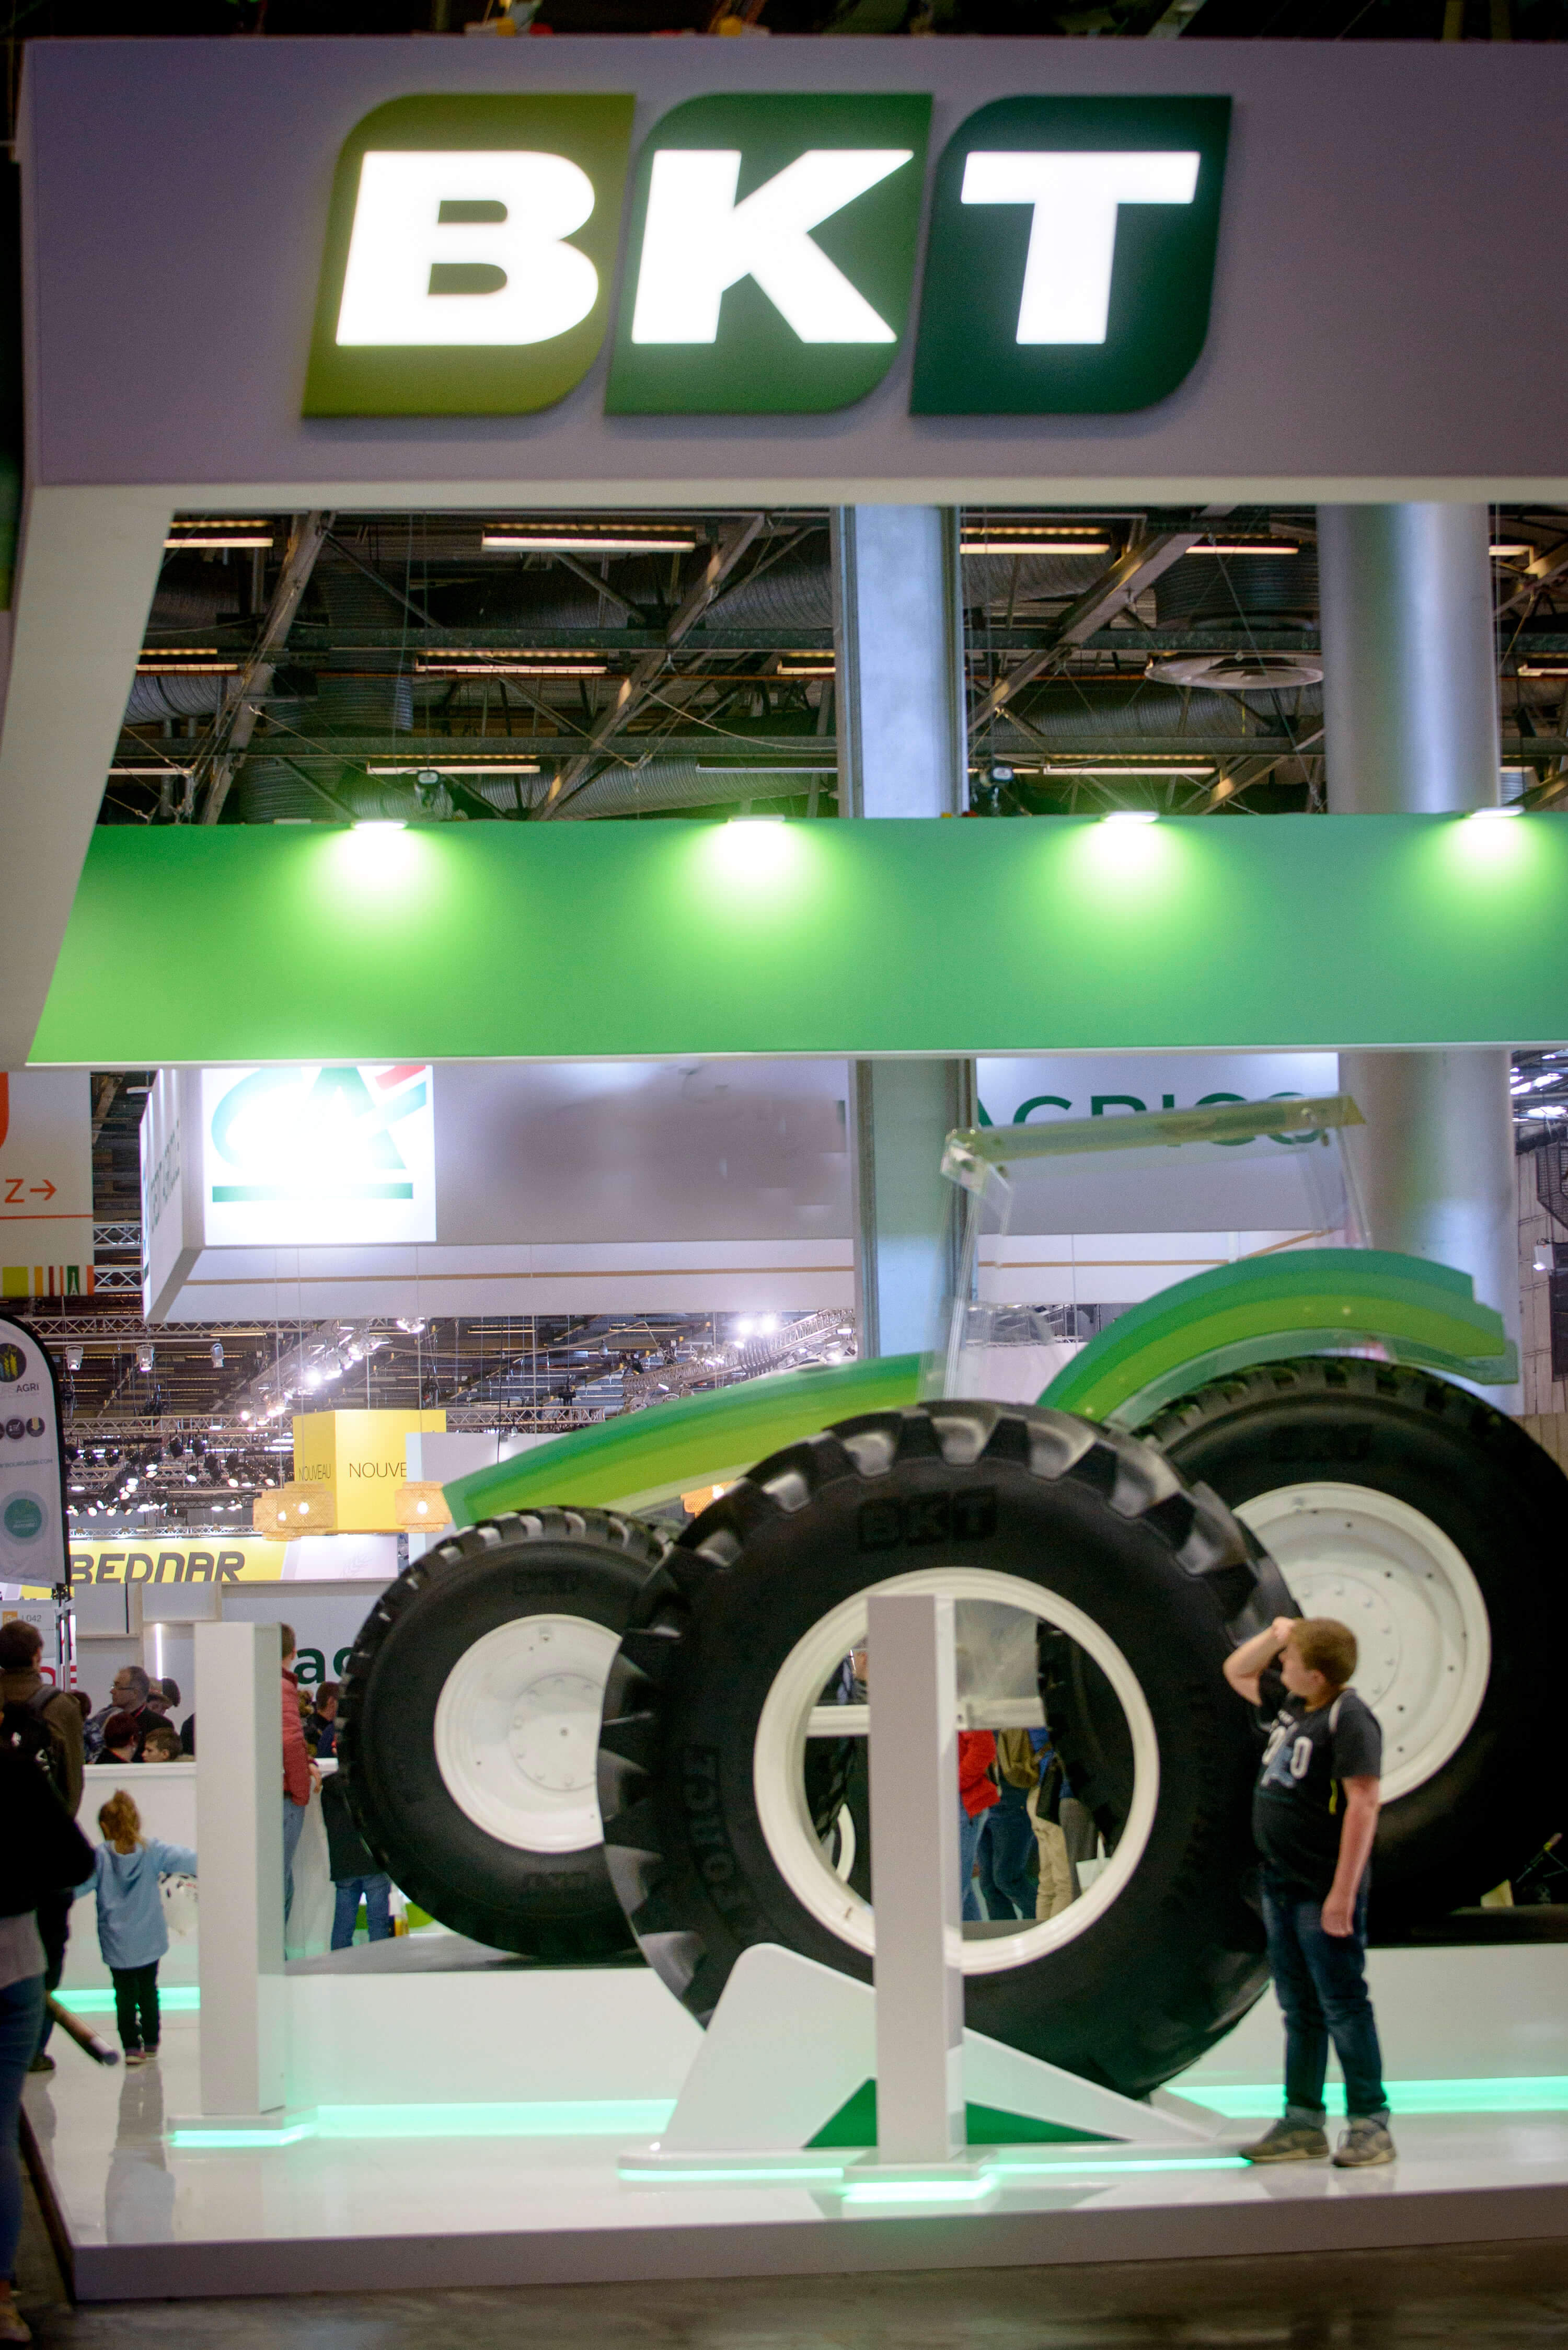 Say hello to BKT’s biggest radial agriculture tire! 2